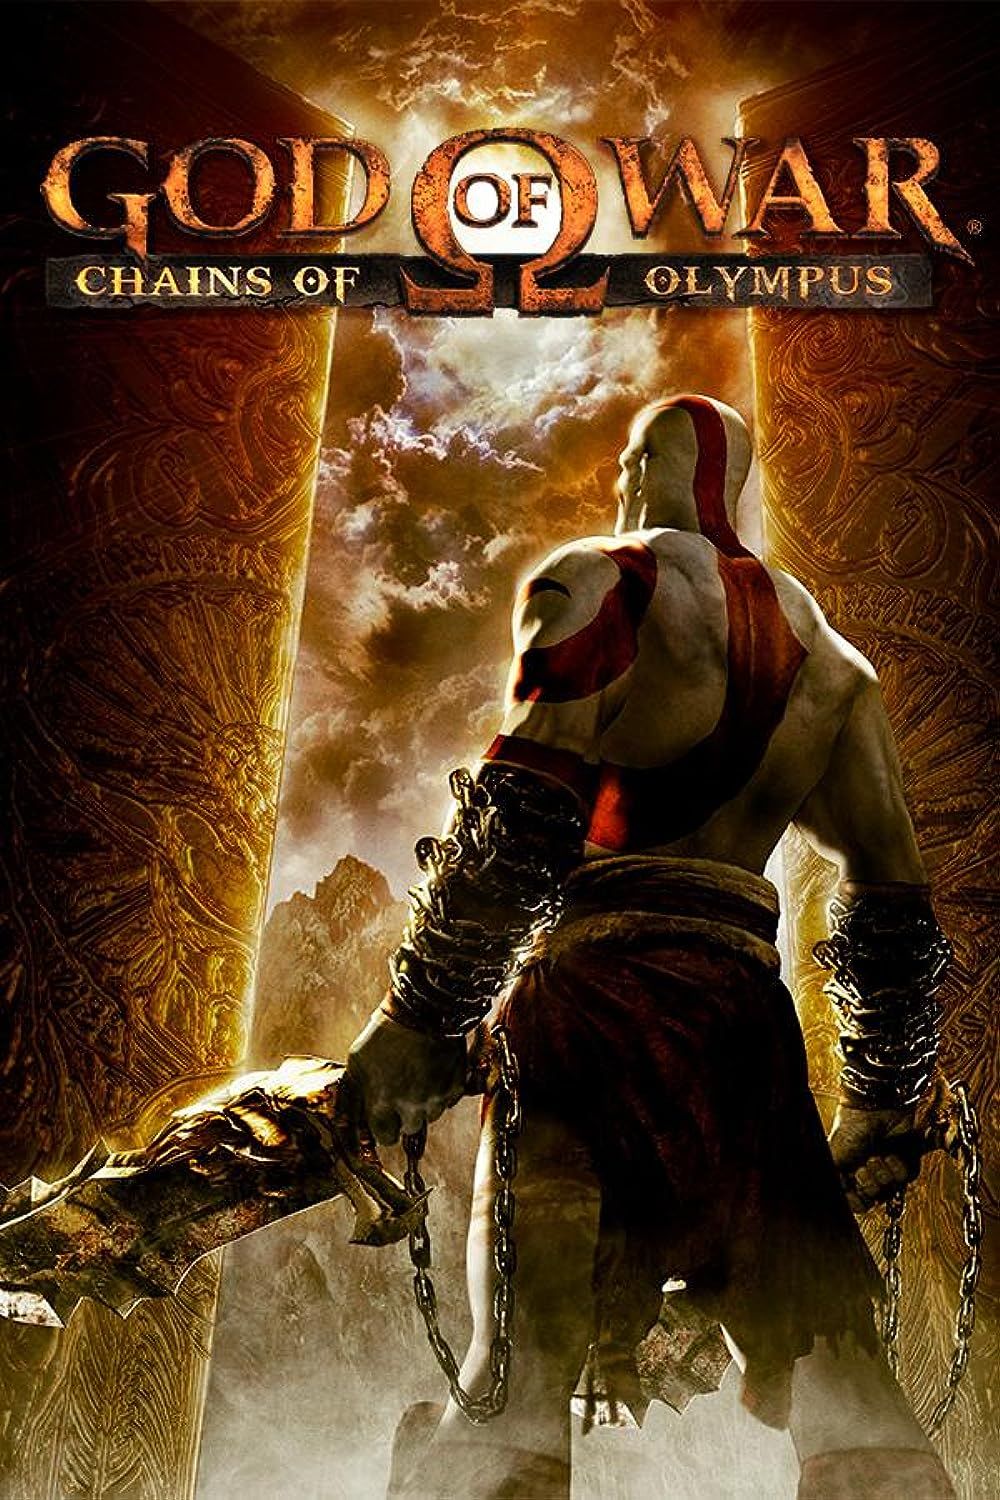 Kratos facing away on the cover of God of War Chains of Olympus